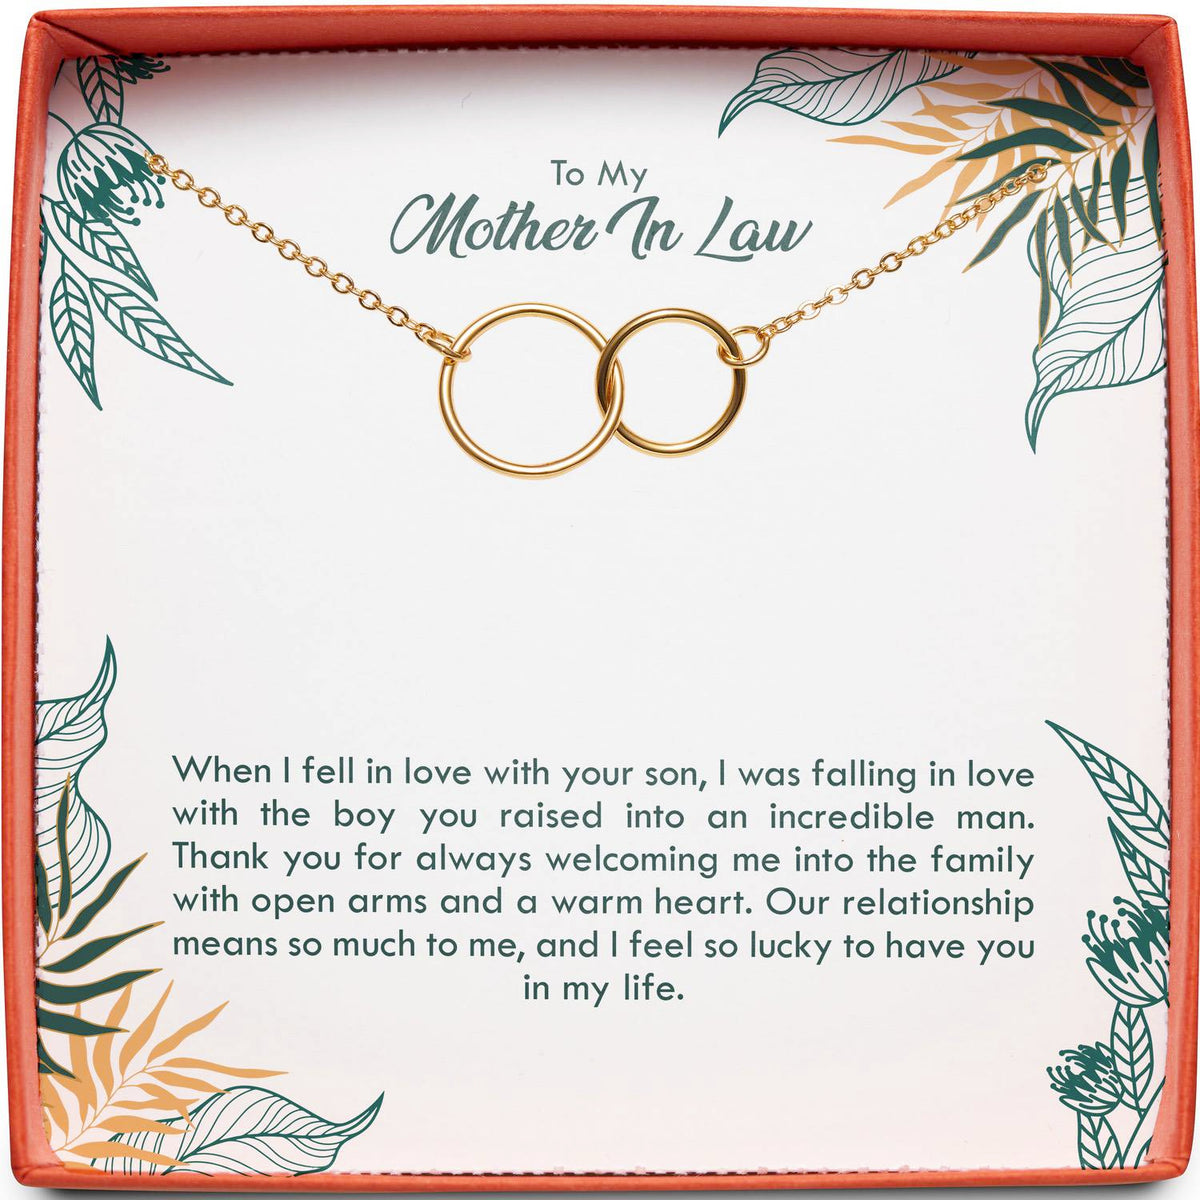 To My Mother In Law | The Boy You Raised | Interlocking Circles